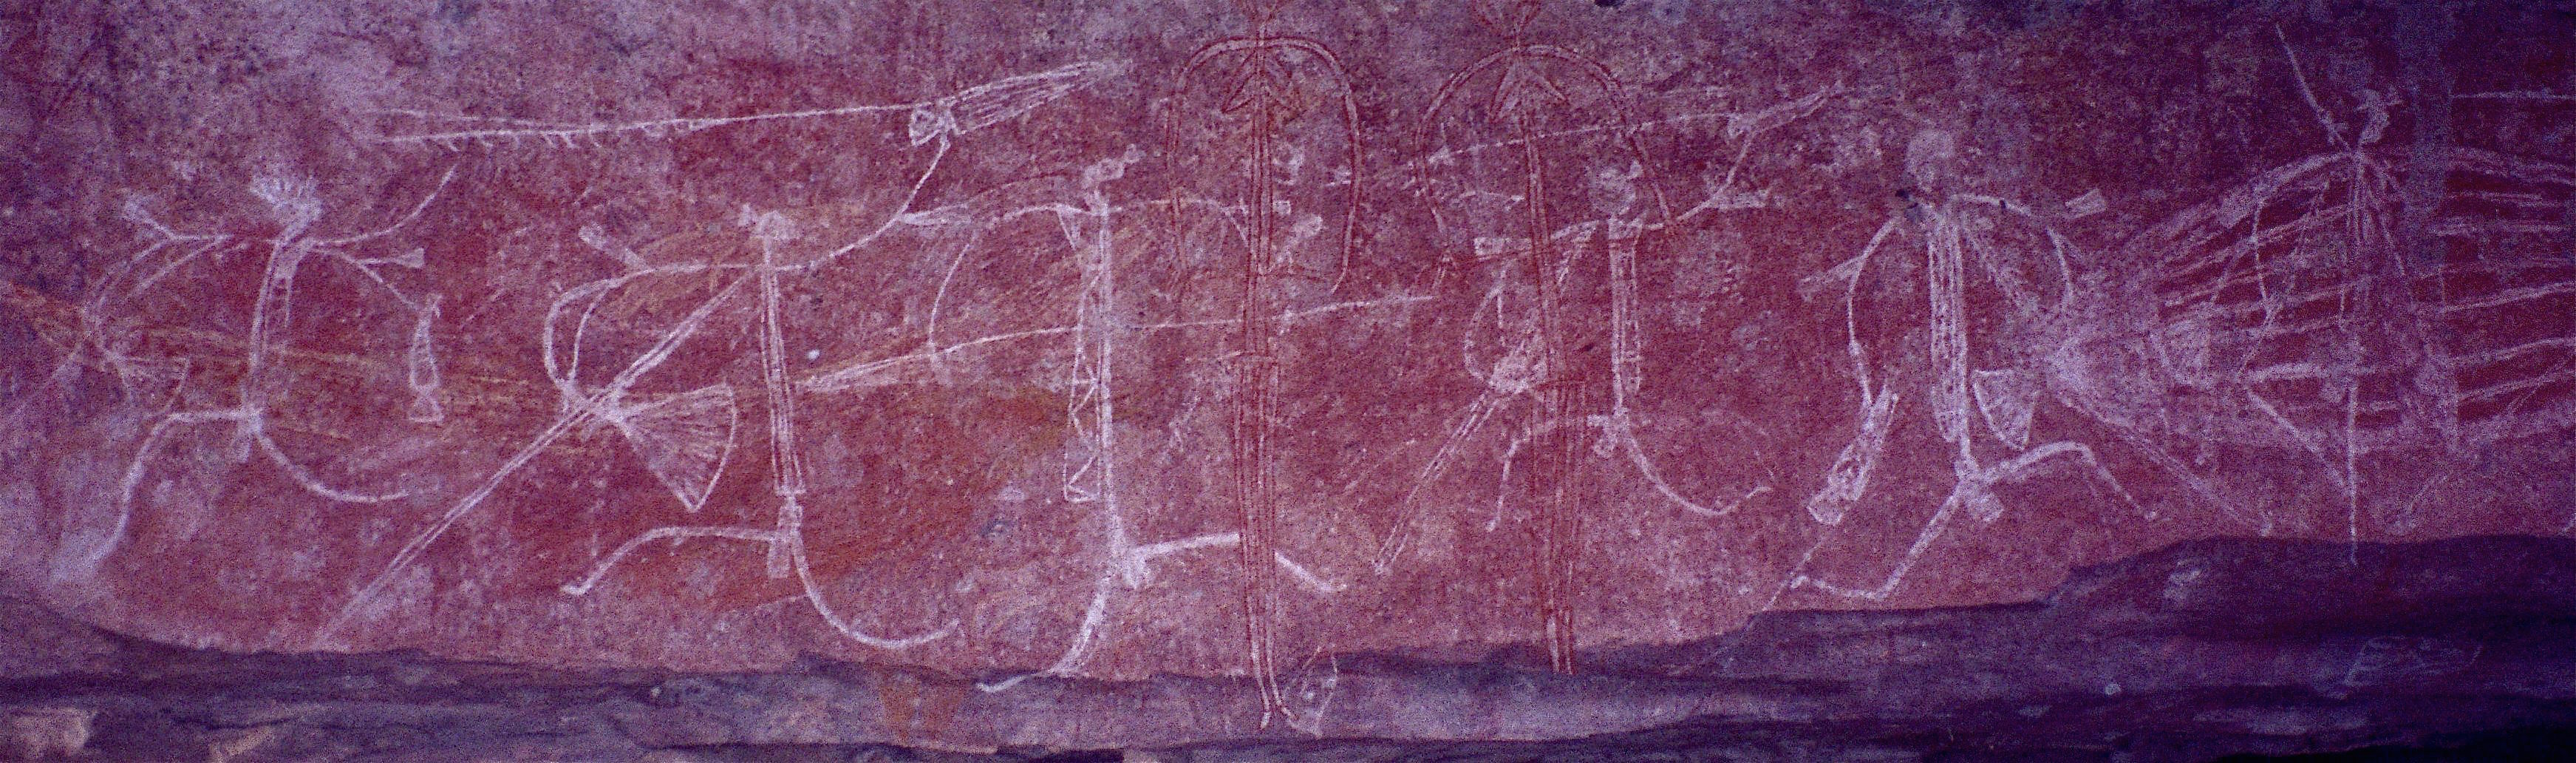 Figure 3: Rock paintings at Ubirr, Kakadu National Park, Australia Photo: Rita Willaert, 2008, via Flickr, from the album Laws to Live By (httpss://creativecommons.org/licenses/by-nc/2.0/legalcode)